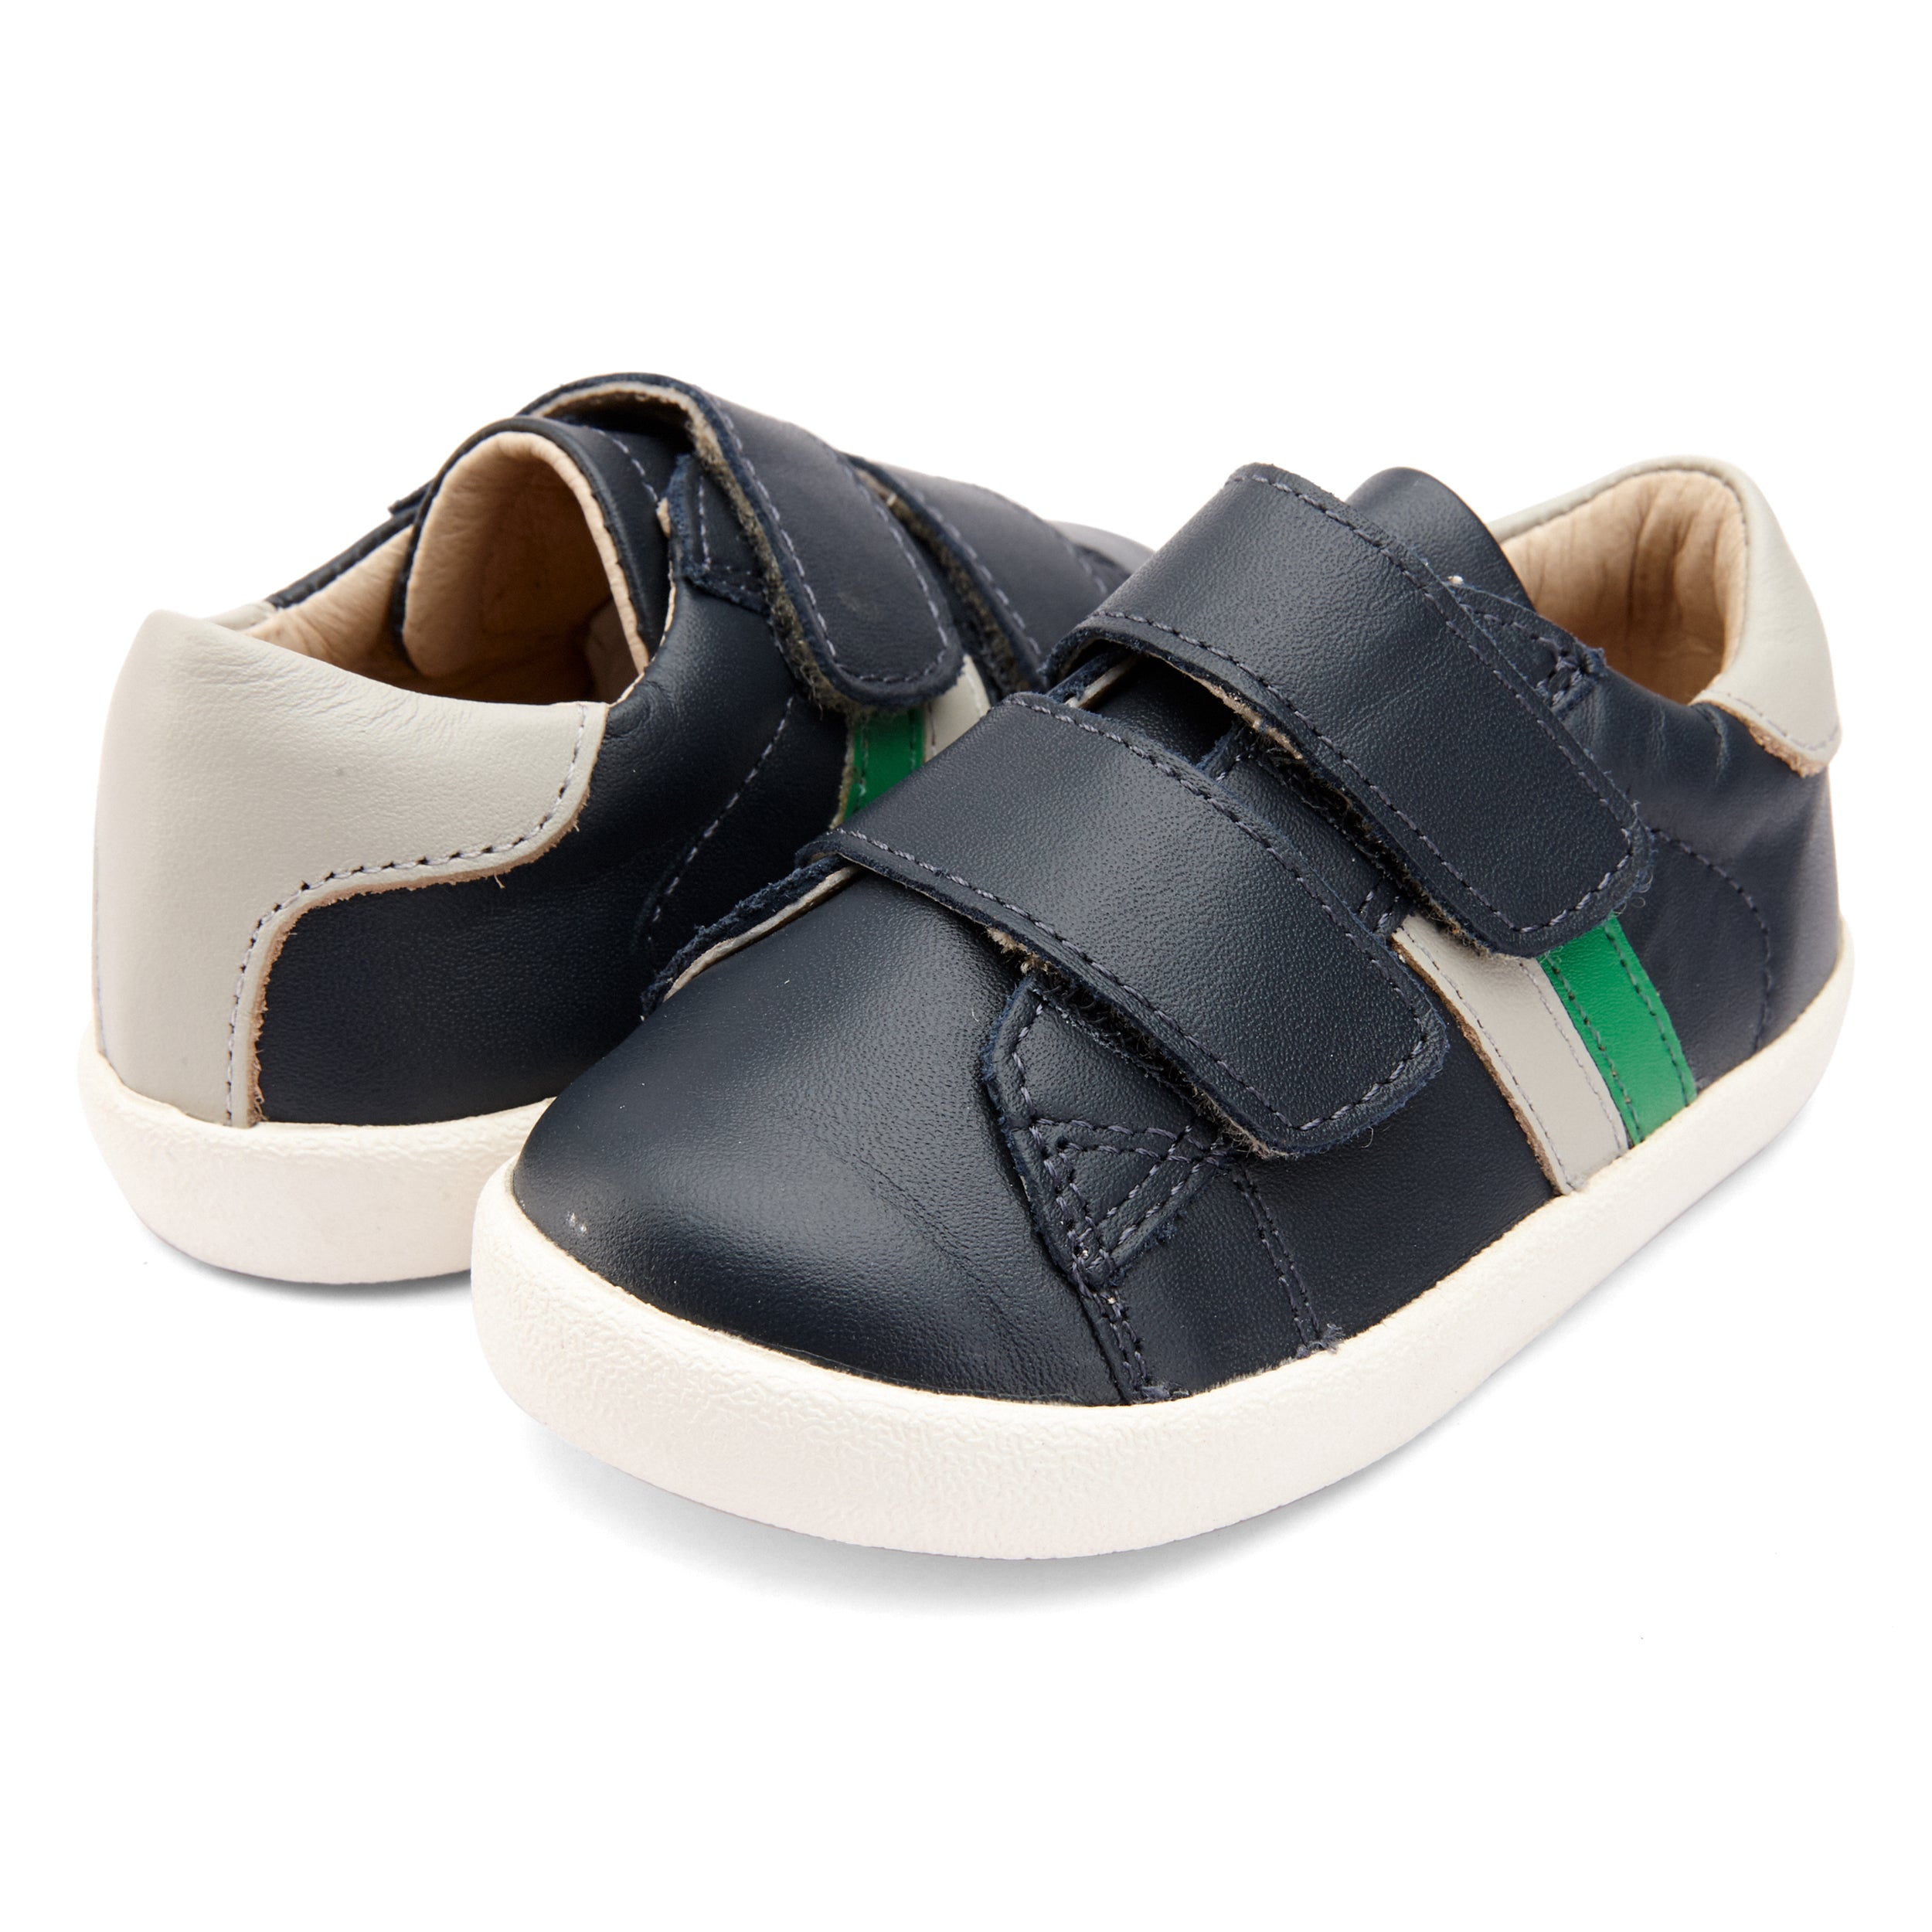 Old Soles Toddy Sport (Toddler/Little Kid)